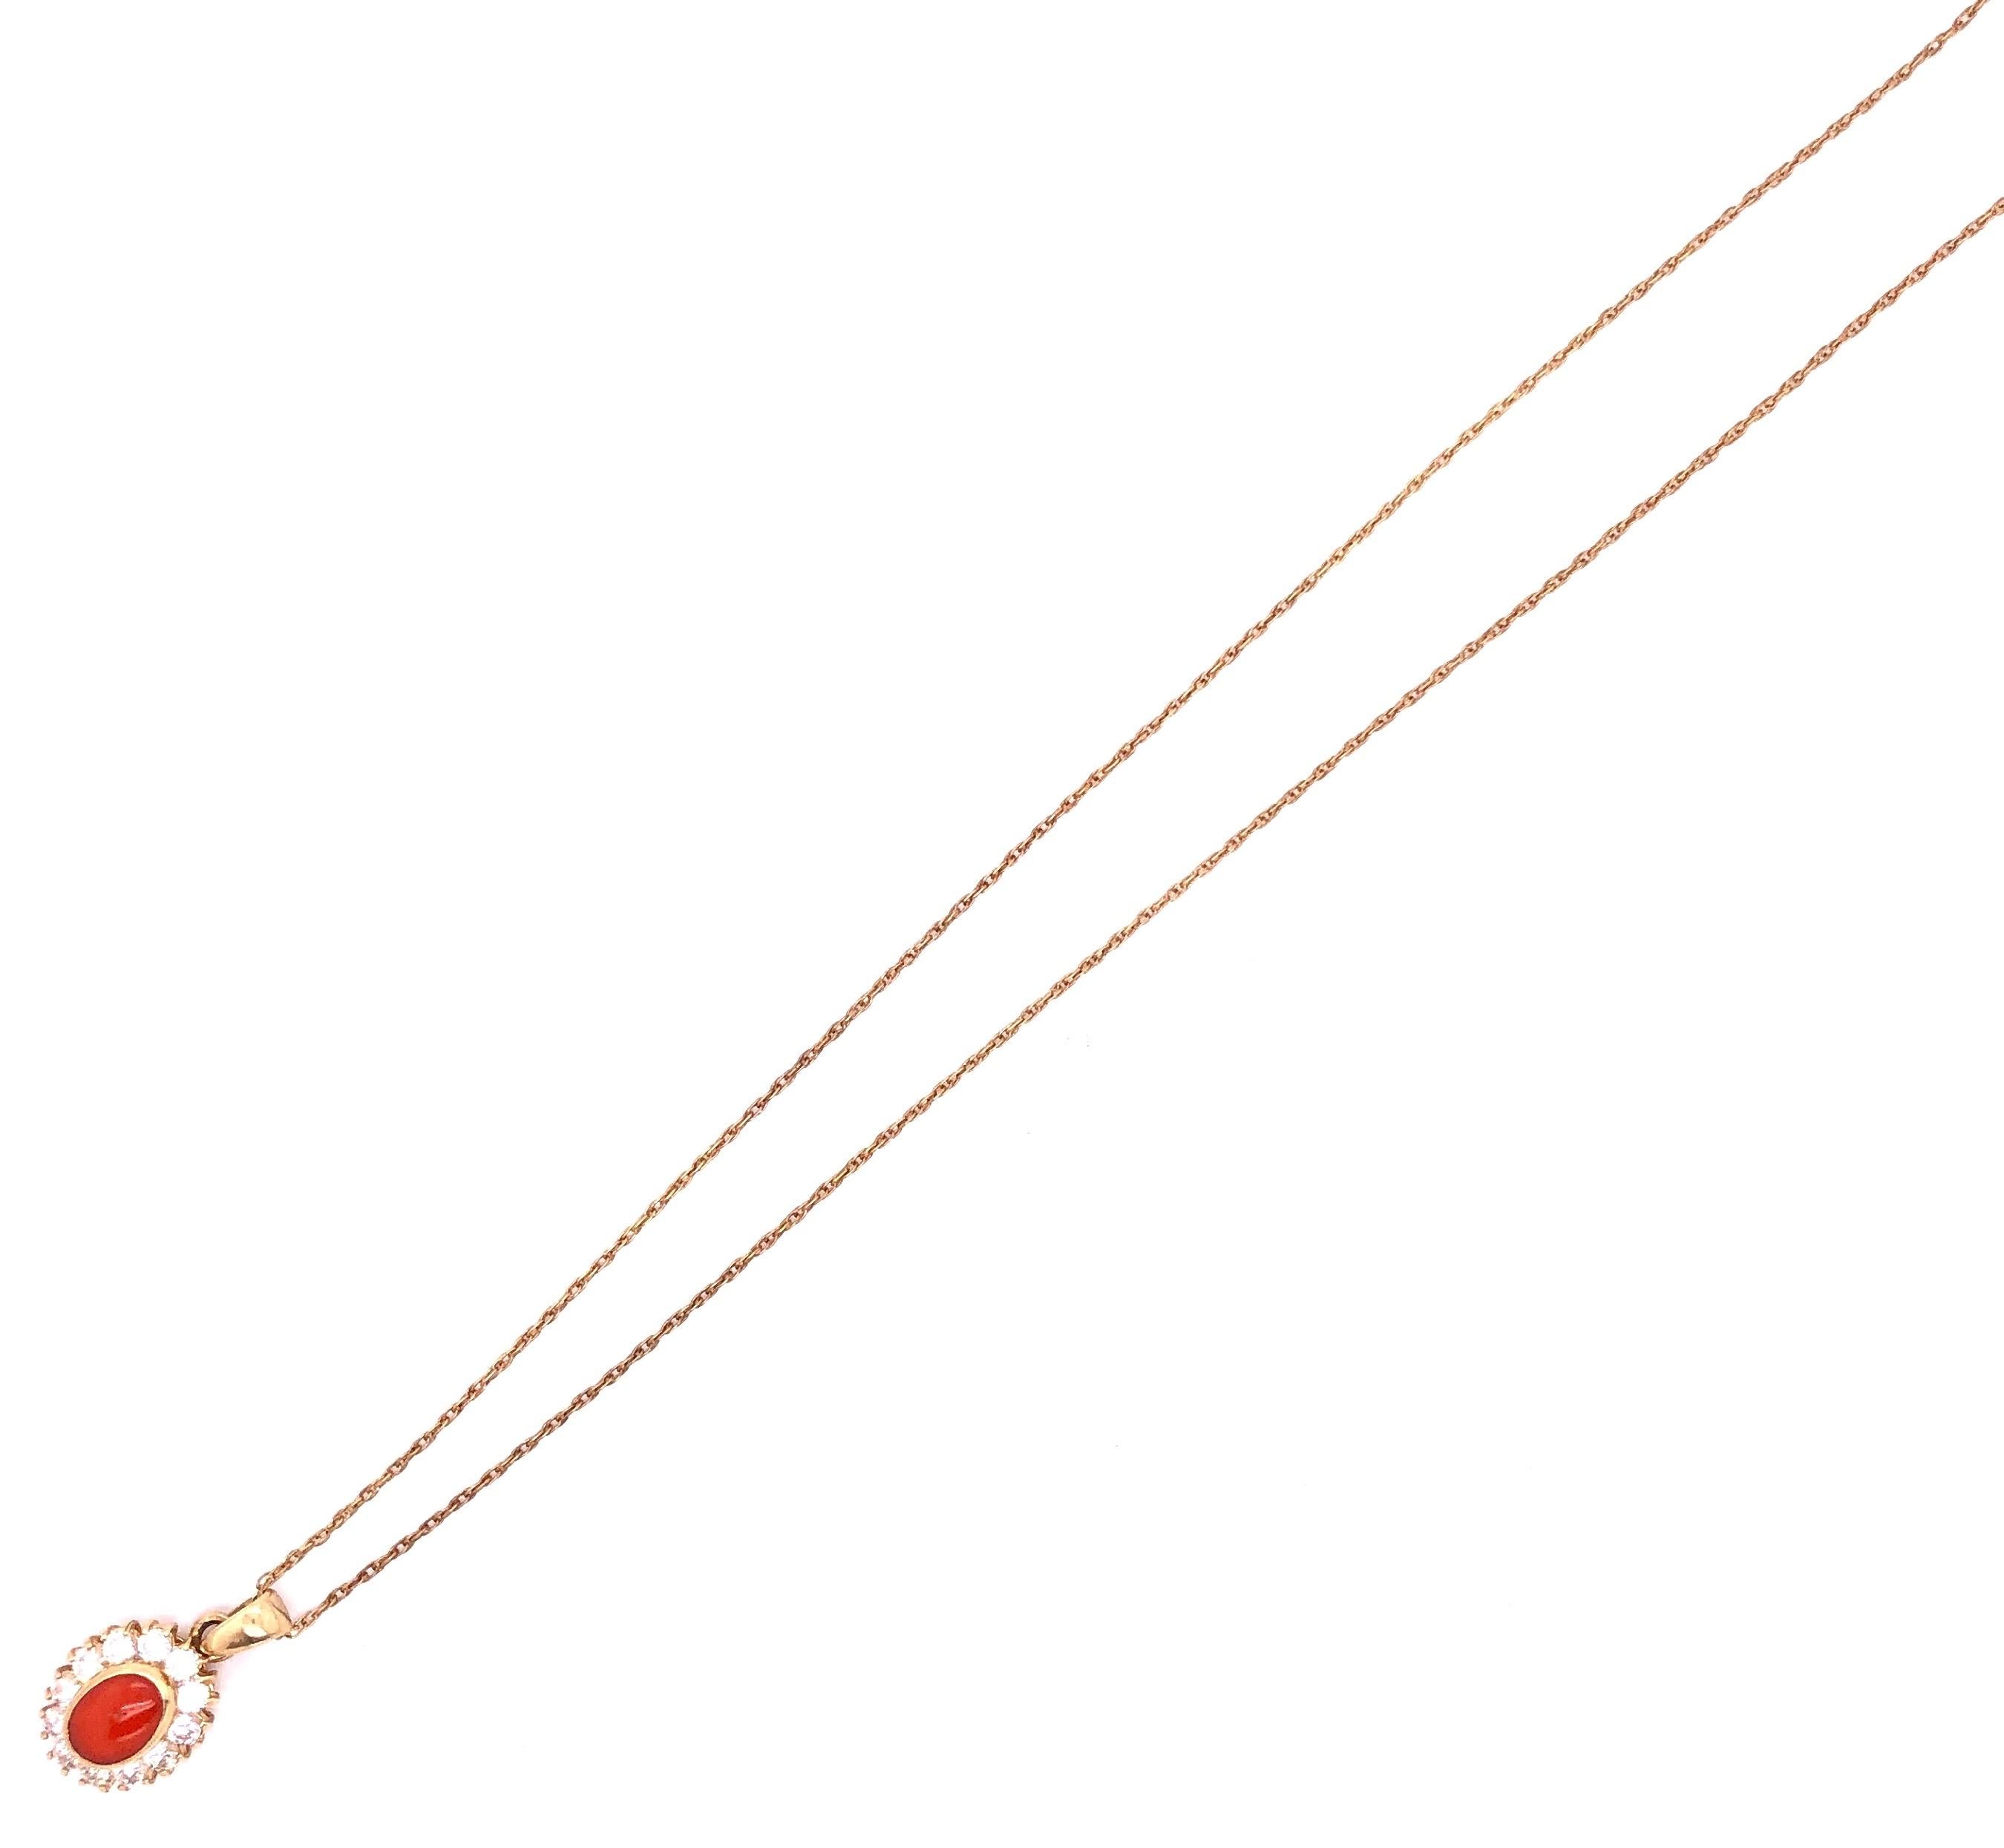 14 Karat Yellow Gold Necklace with Oval Coral and Round Zirconium Pendant For Sale 2